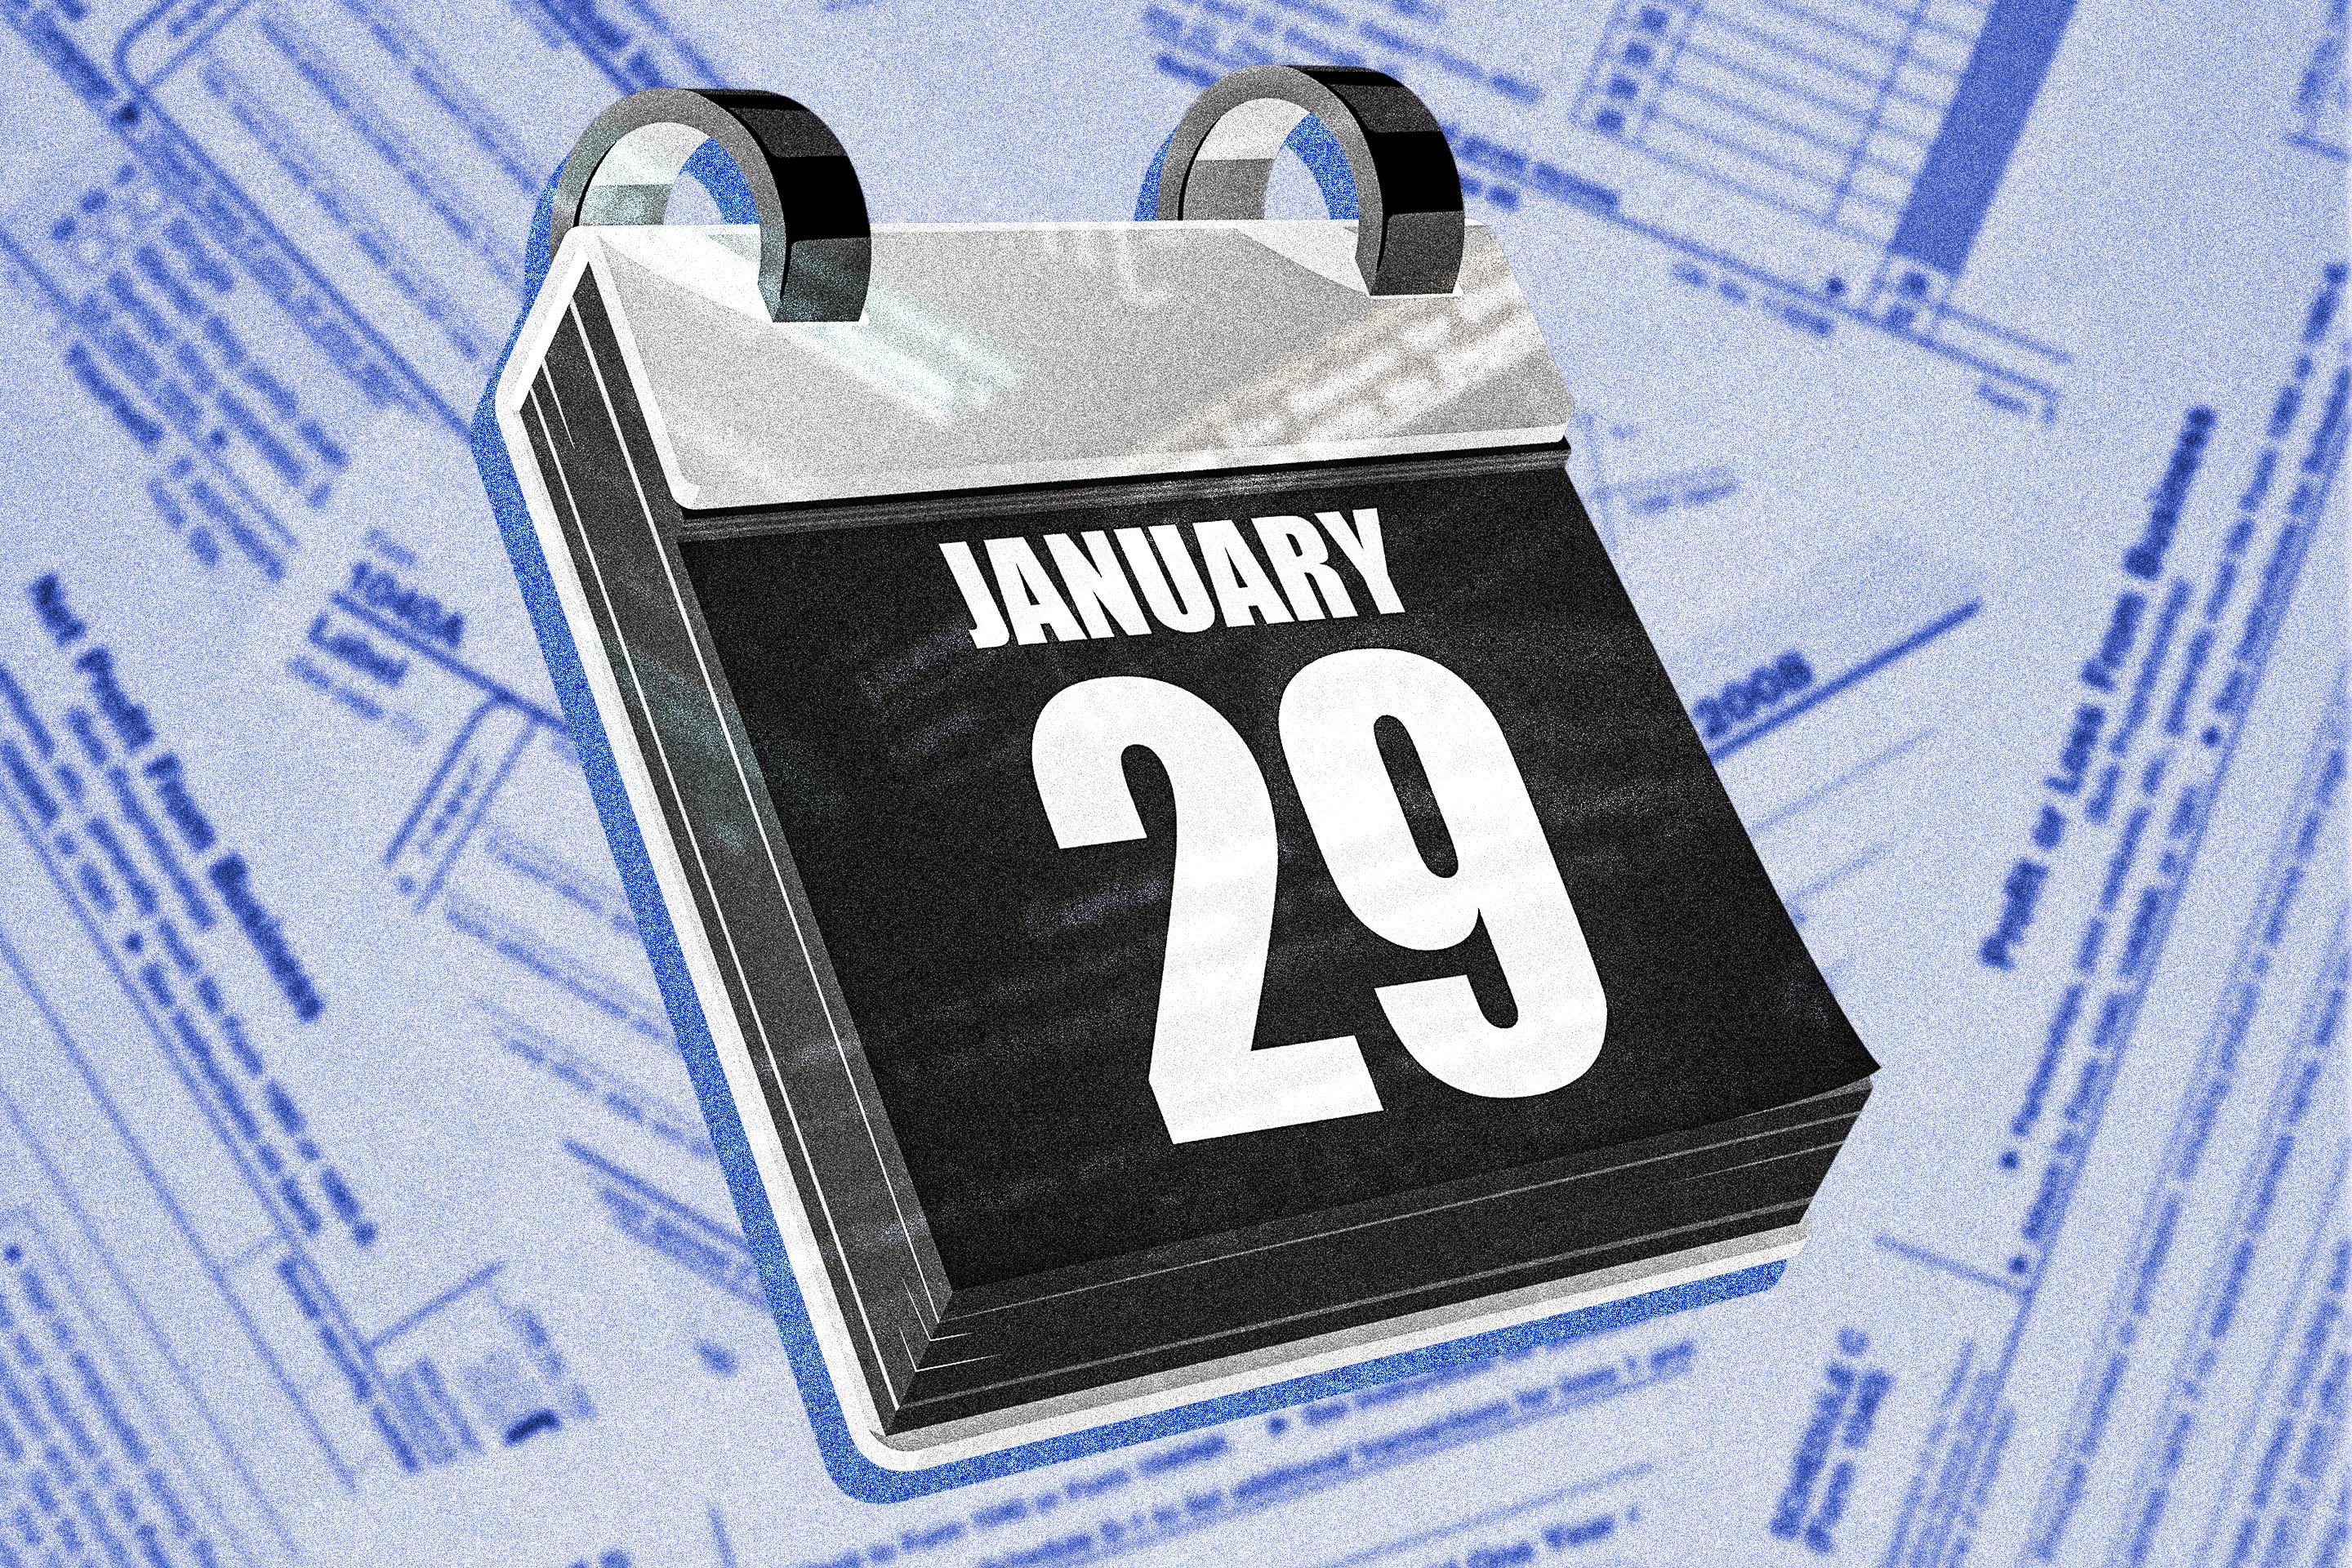 Tax Season Starts Today — Here Are Key Dates to Help Get Your Refund Fast